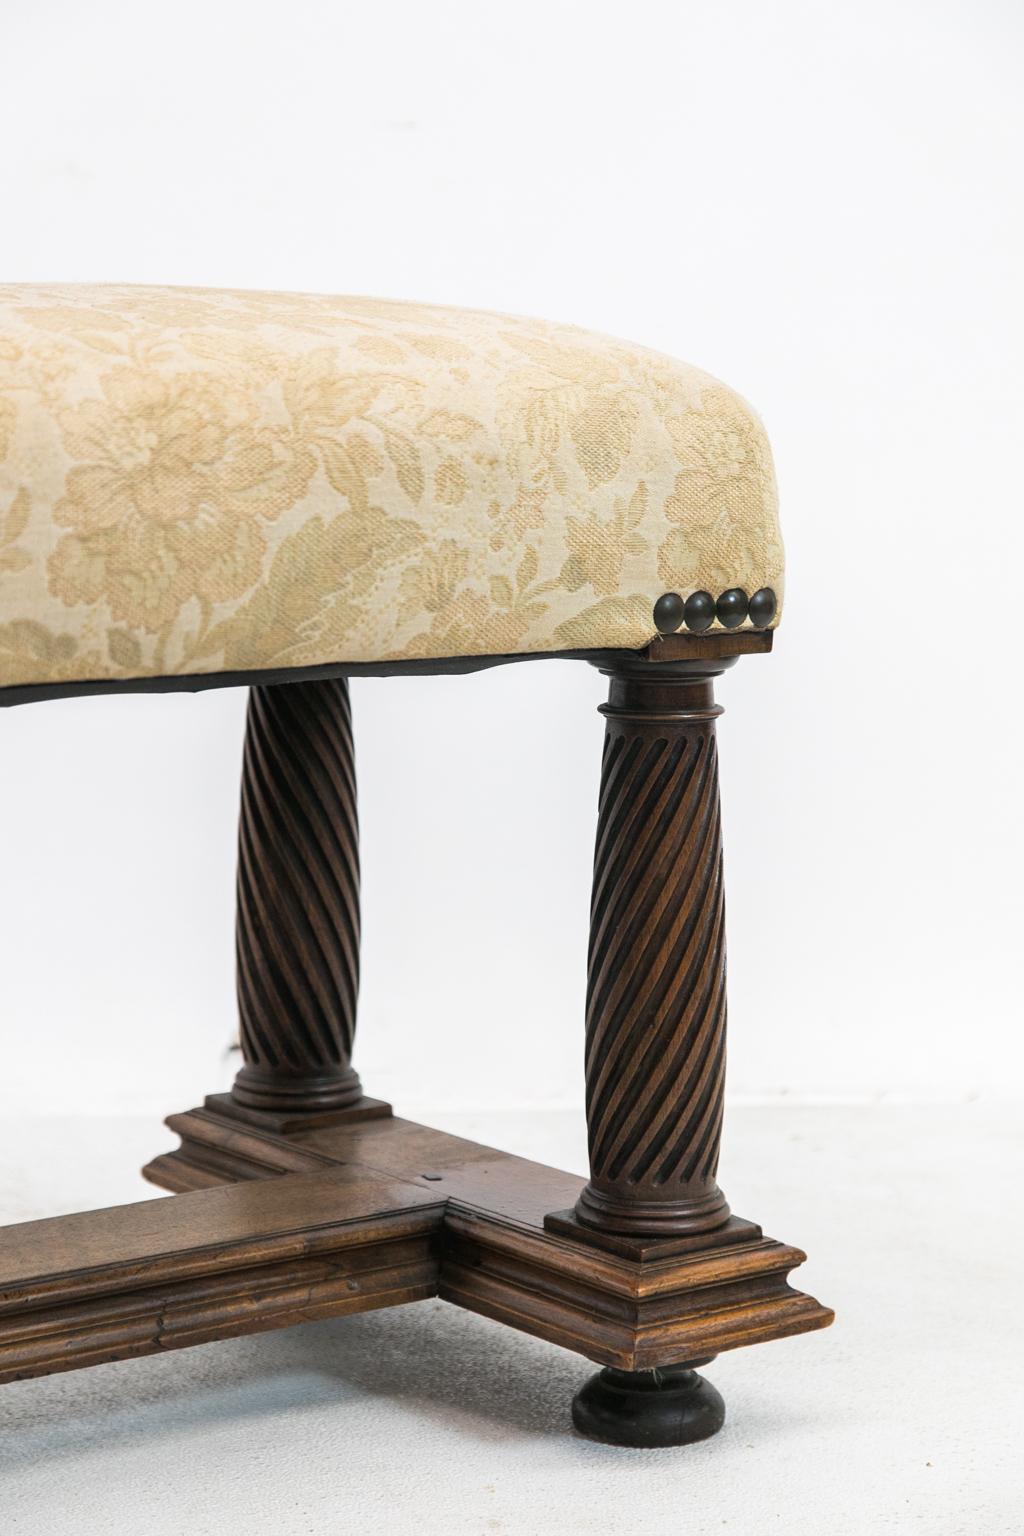 Fabric English Spiral Carved Stretcher Base Bench For Sale